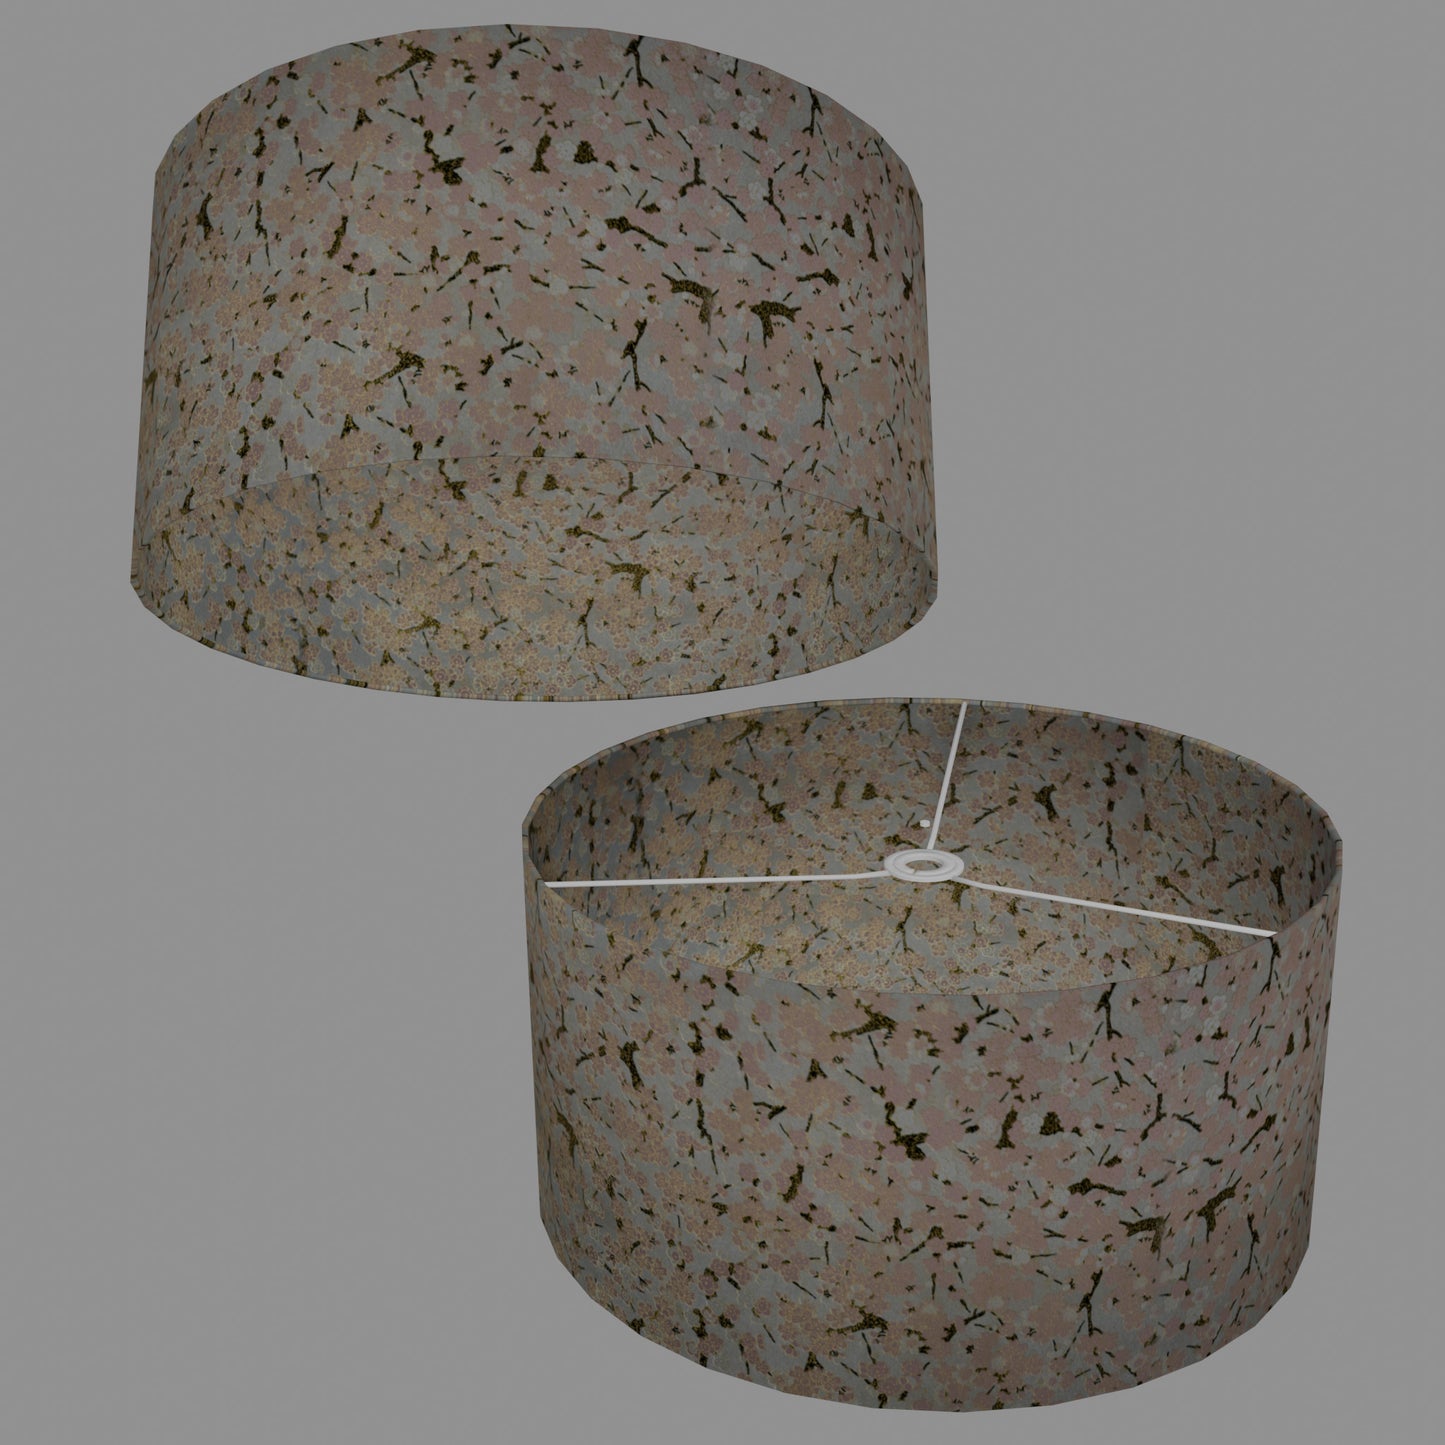 Drum Lamp Shade - W02 - Pink Cherry Blossom on Grey, 50cm(d) x 25cm(h)